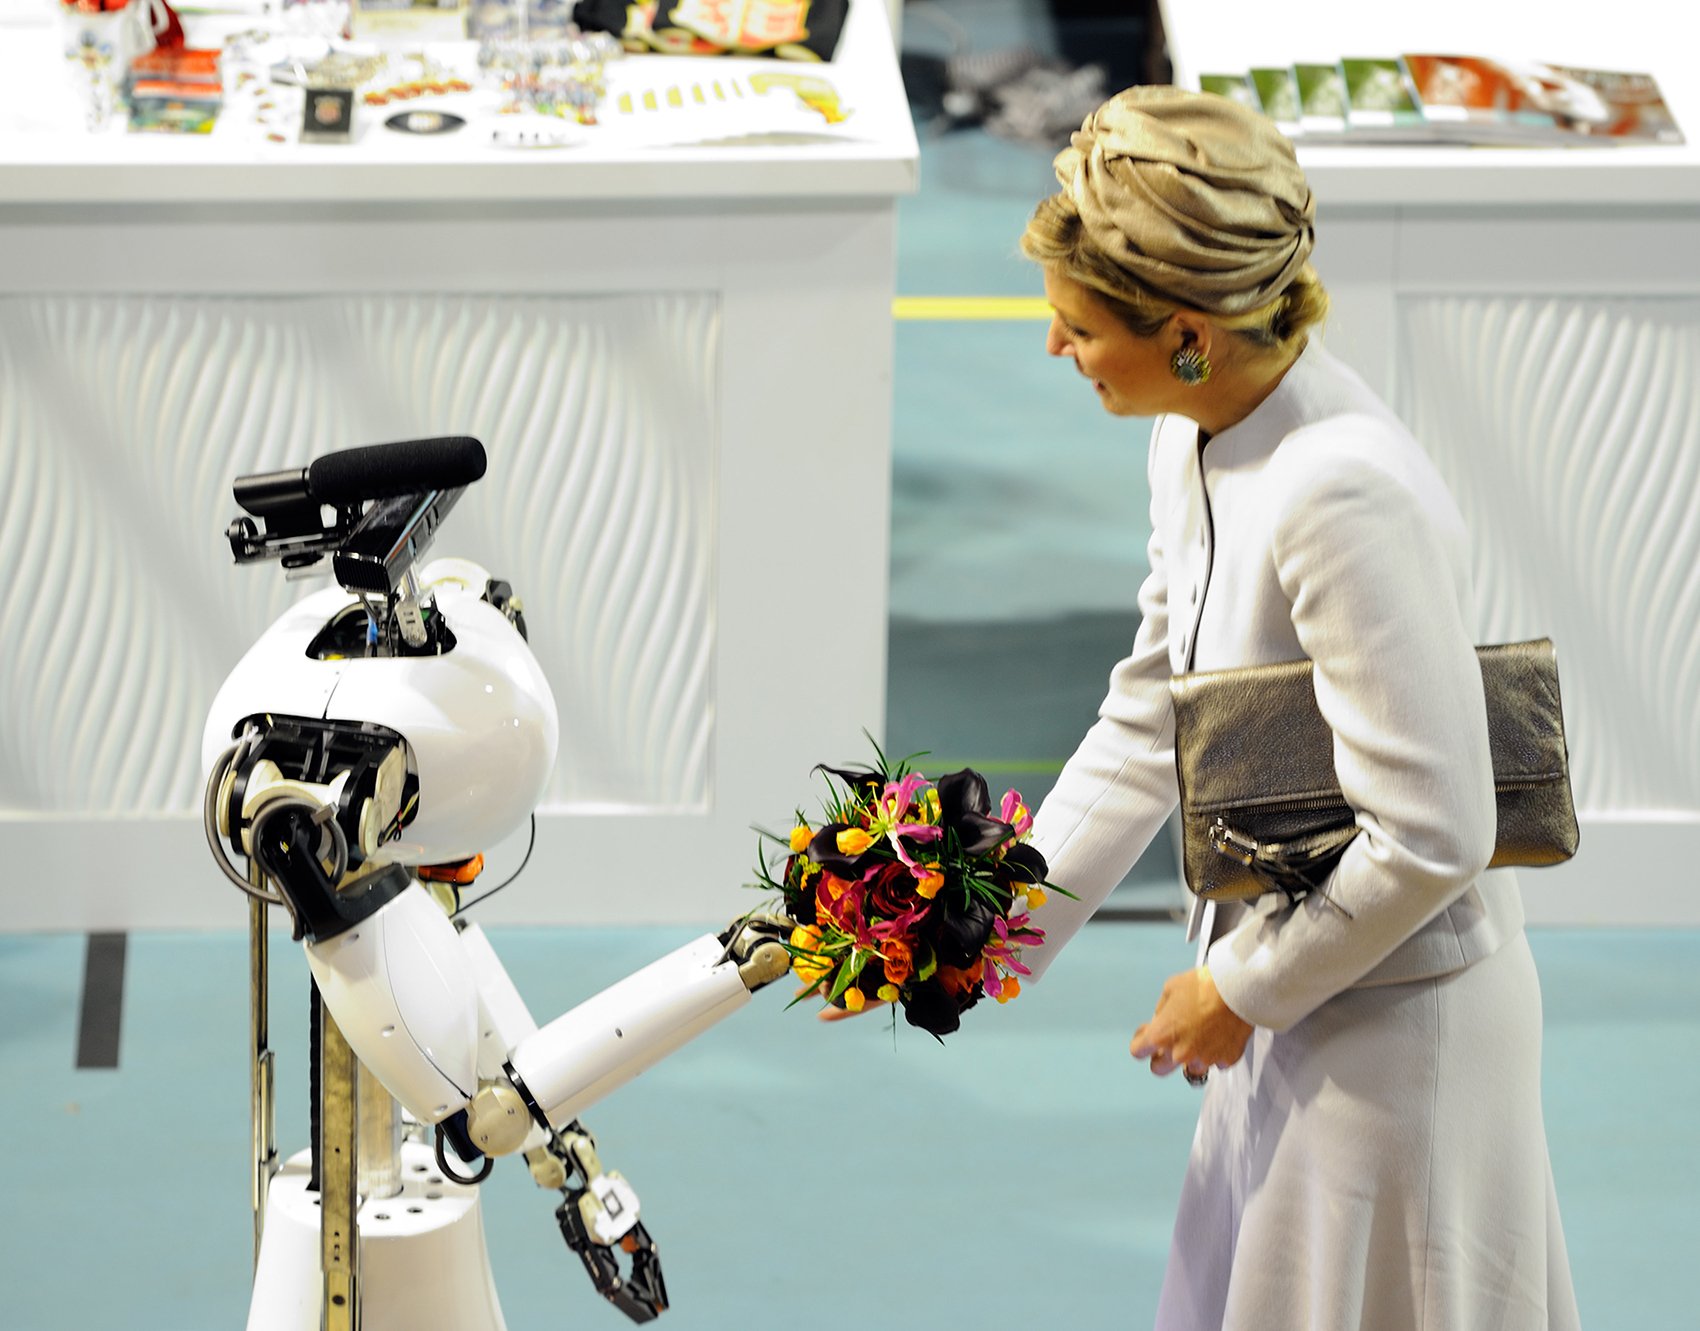 Maxima gets flowers from a robot at the Robocup